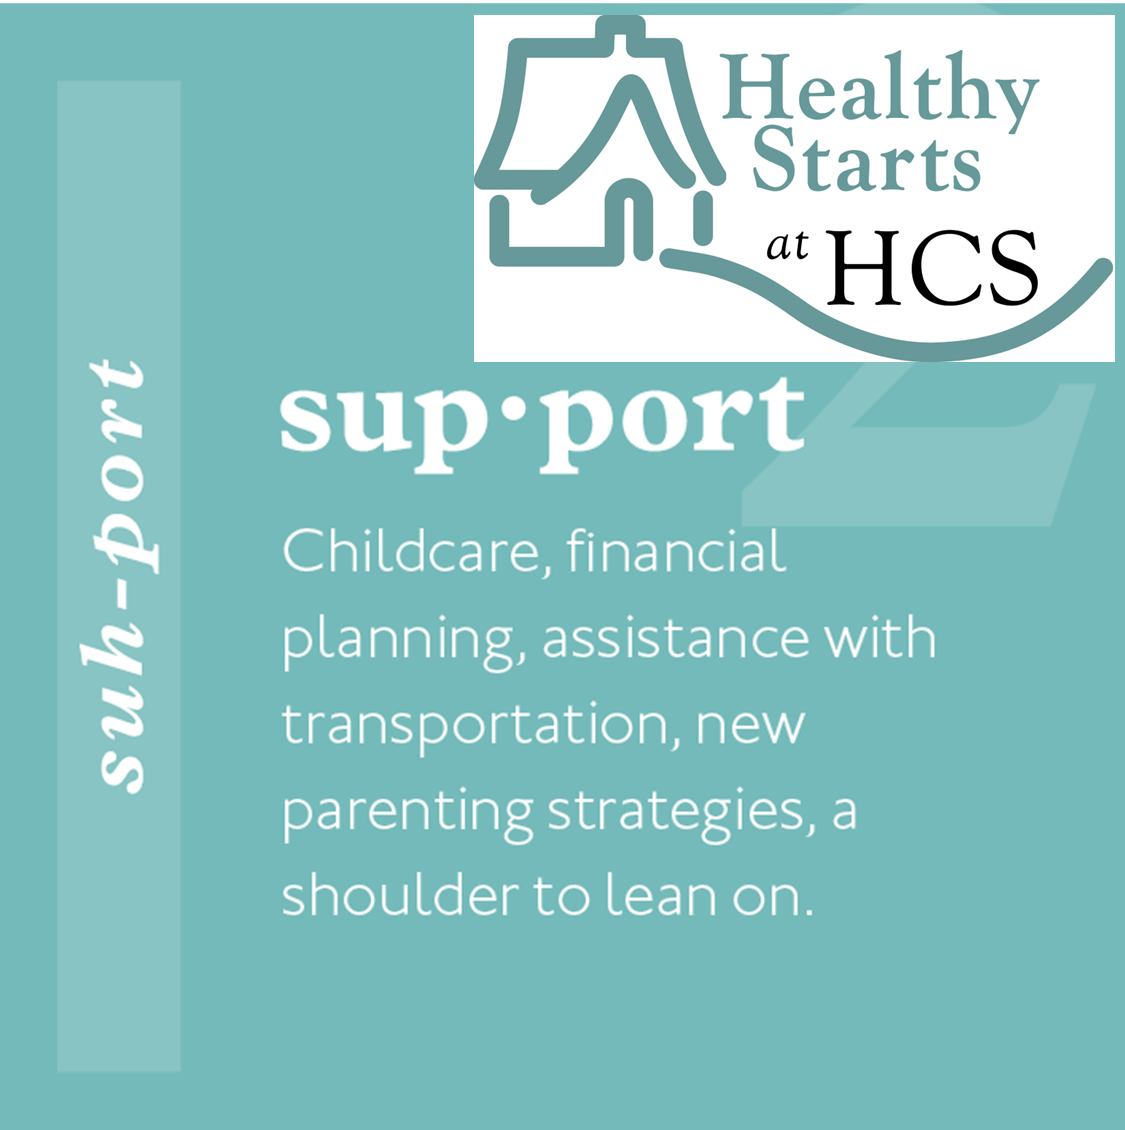 Definition of support saying: Childcare, financial planning, assistance with transportation, new parenting strategies, a shoulder to lean on